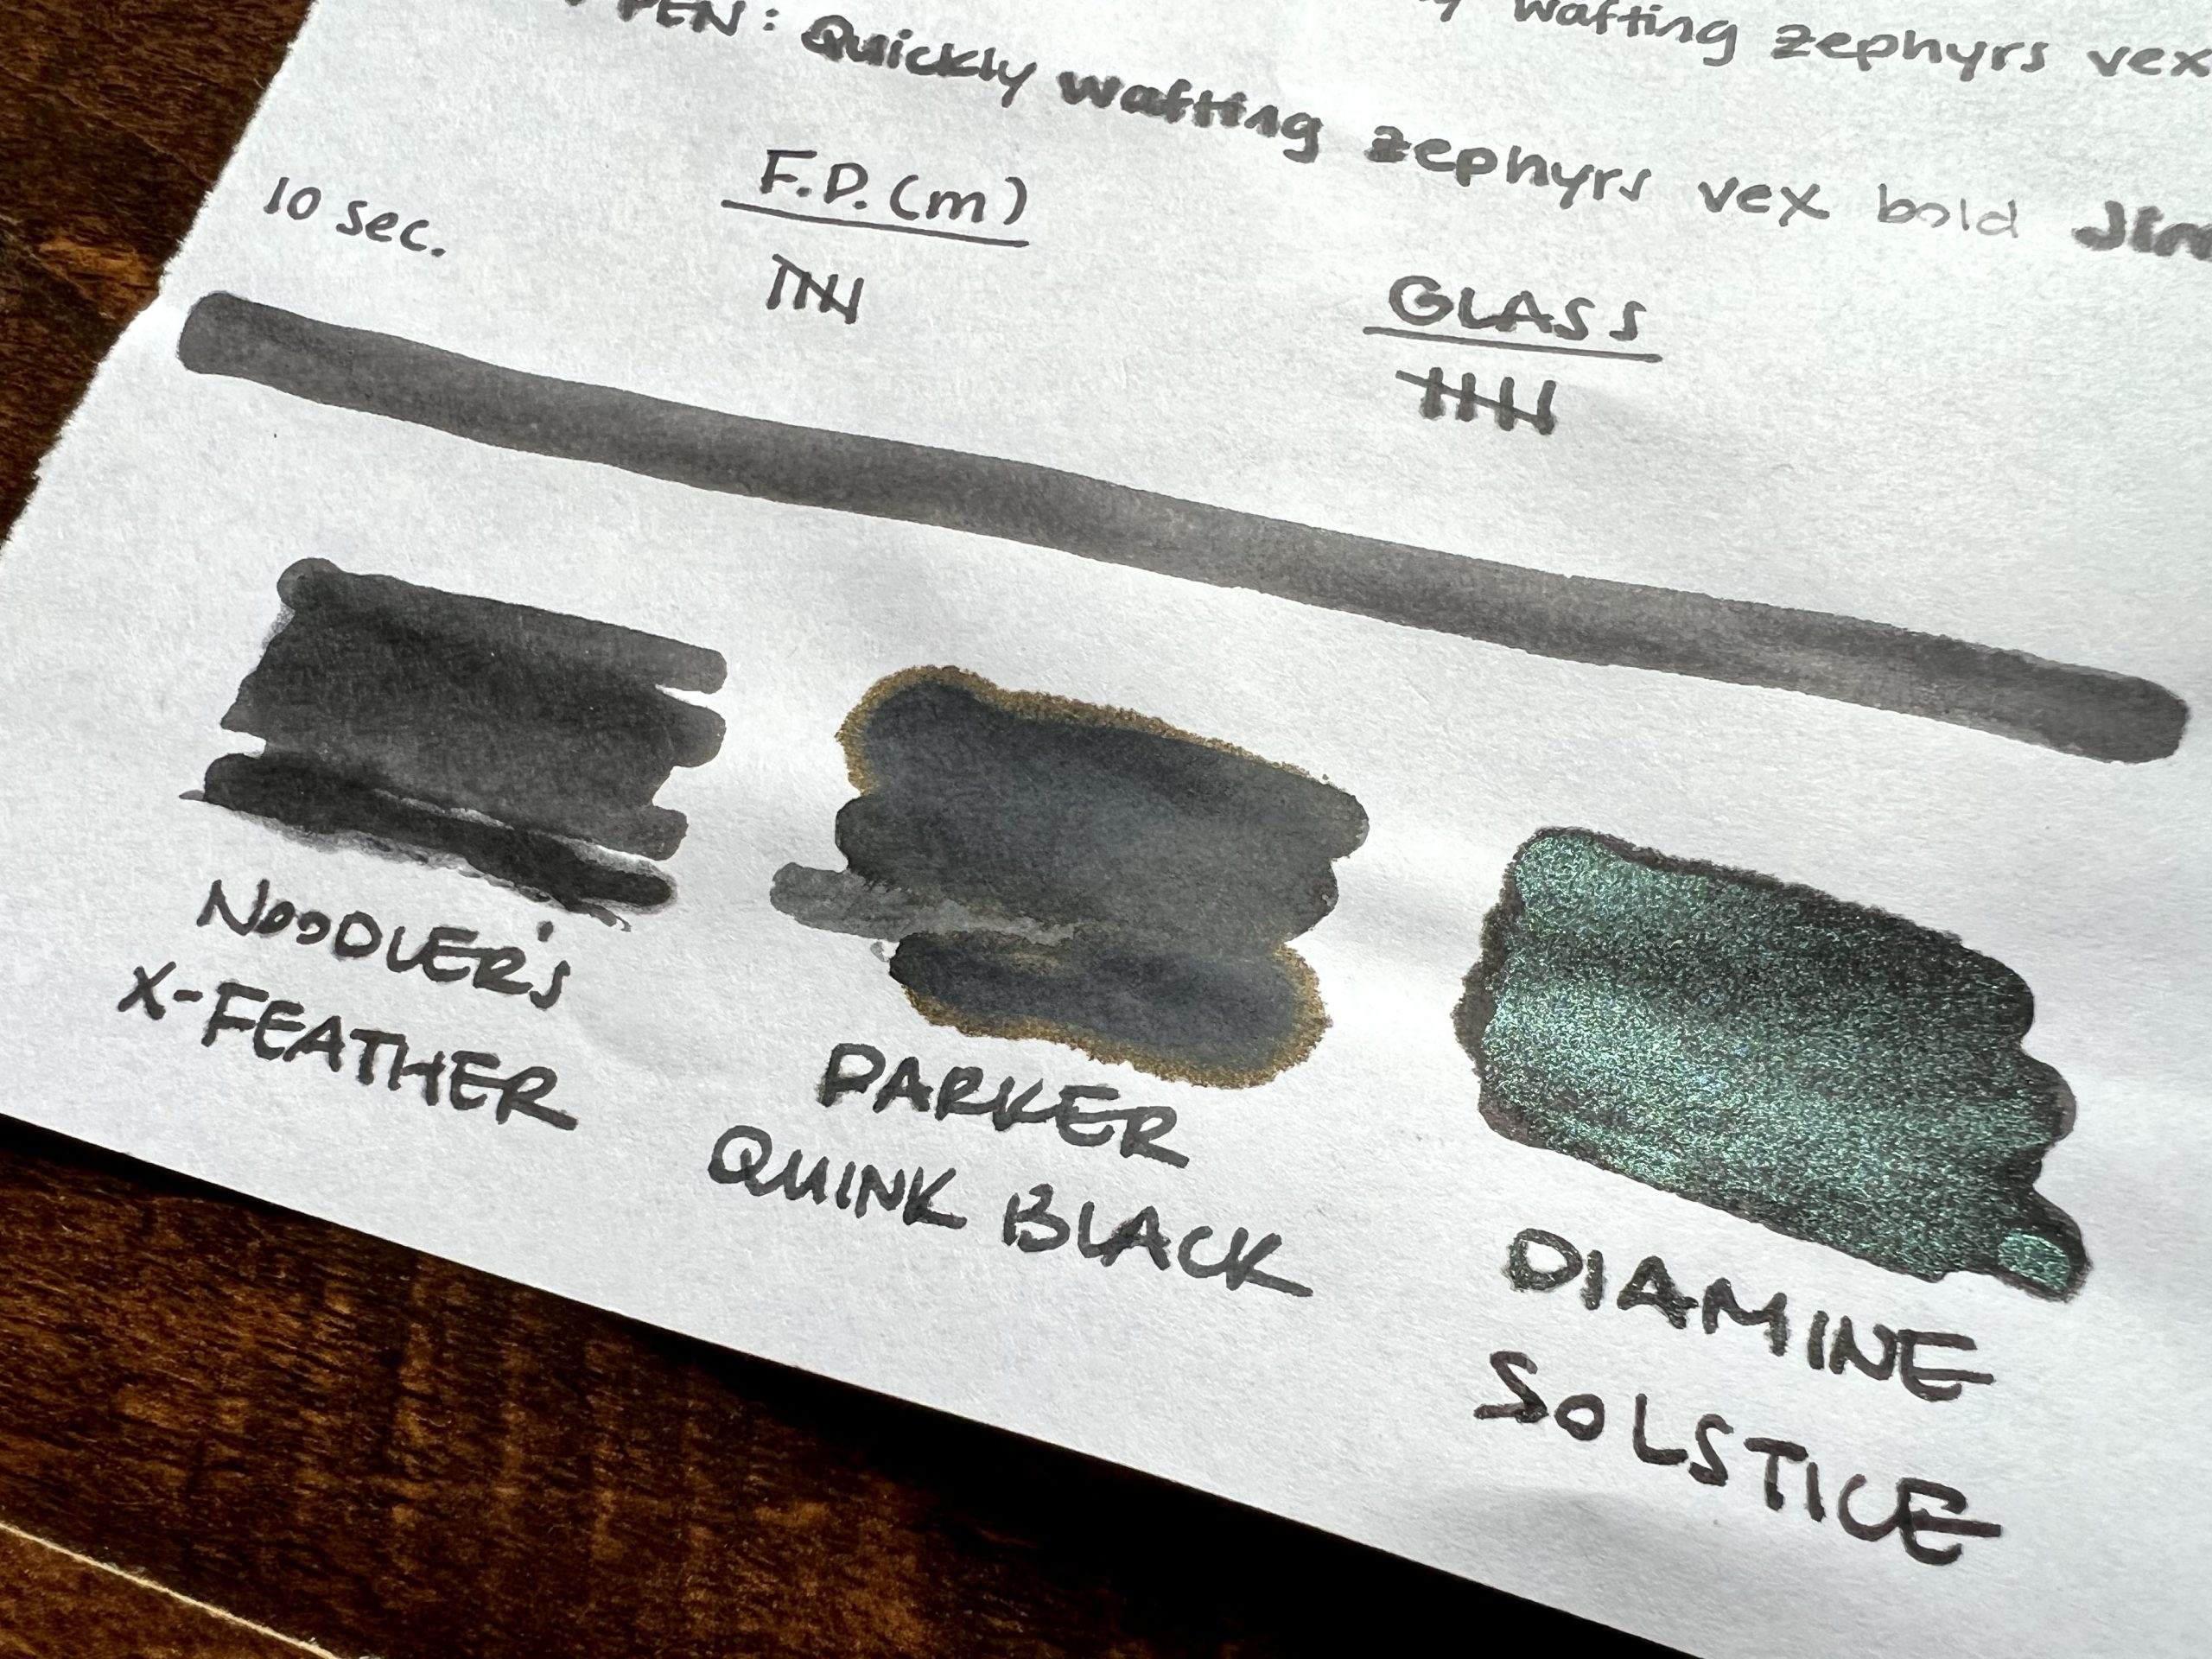 Ink Comparison on Copy paper during Diplomat Black ink review